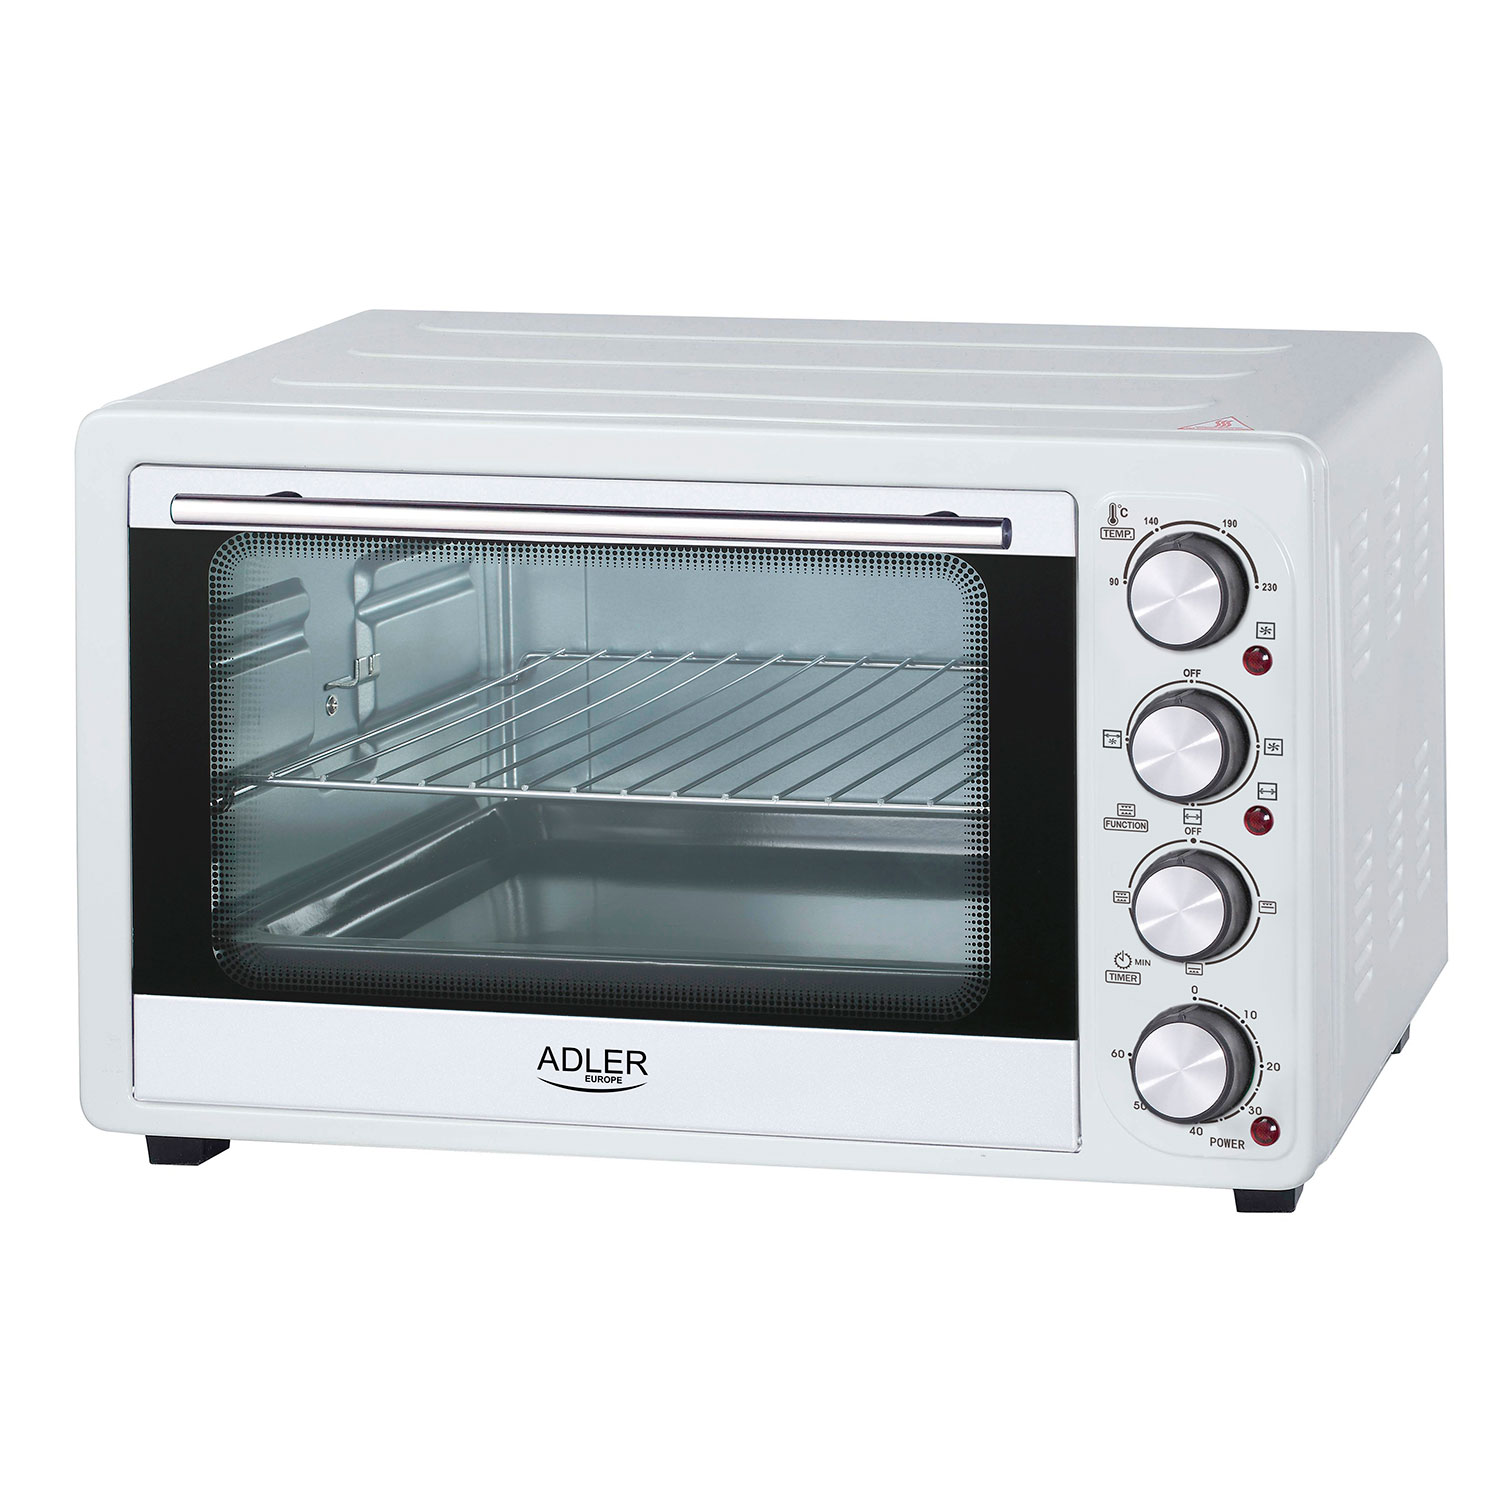 35L Desktop Convection Oven Roaster Chicken Rustor Stainless Steel. 1500W  Eagle